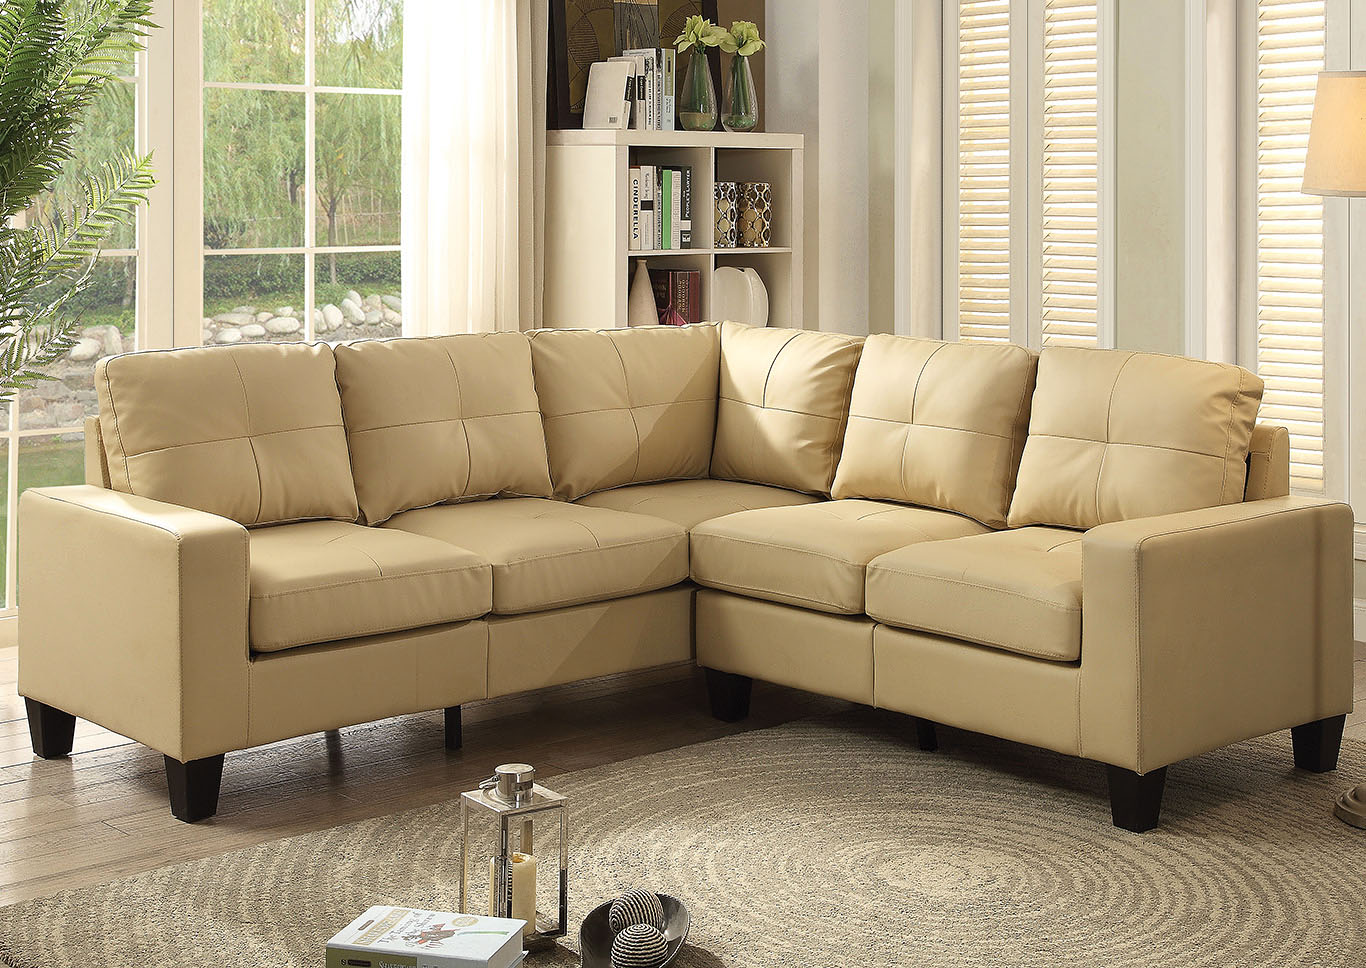 Beige Faux Leather Sectional L A Furniture, Faux Leather Sectional